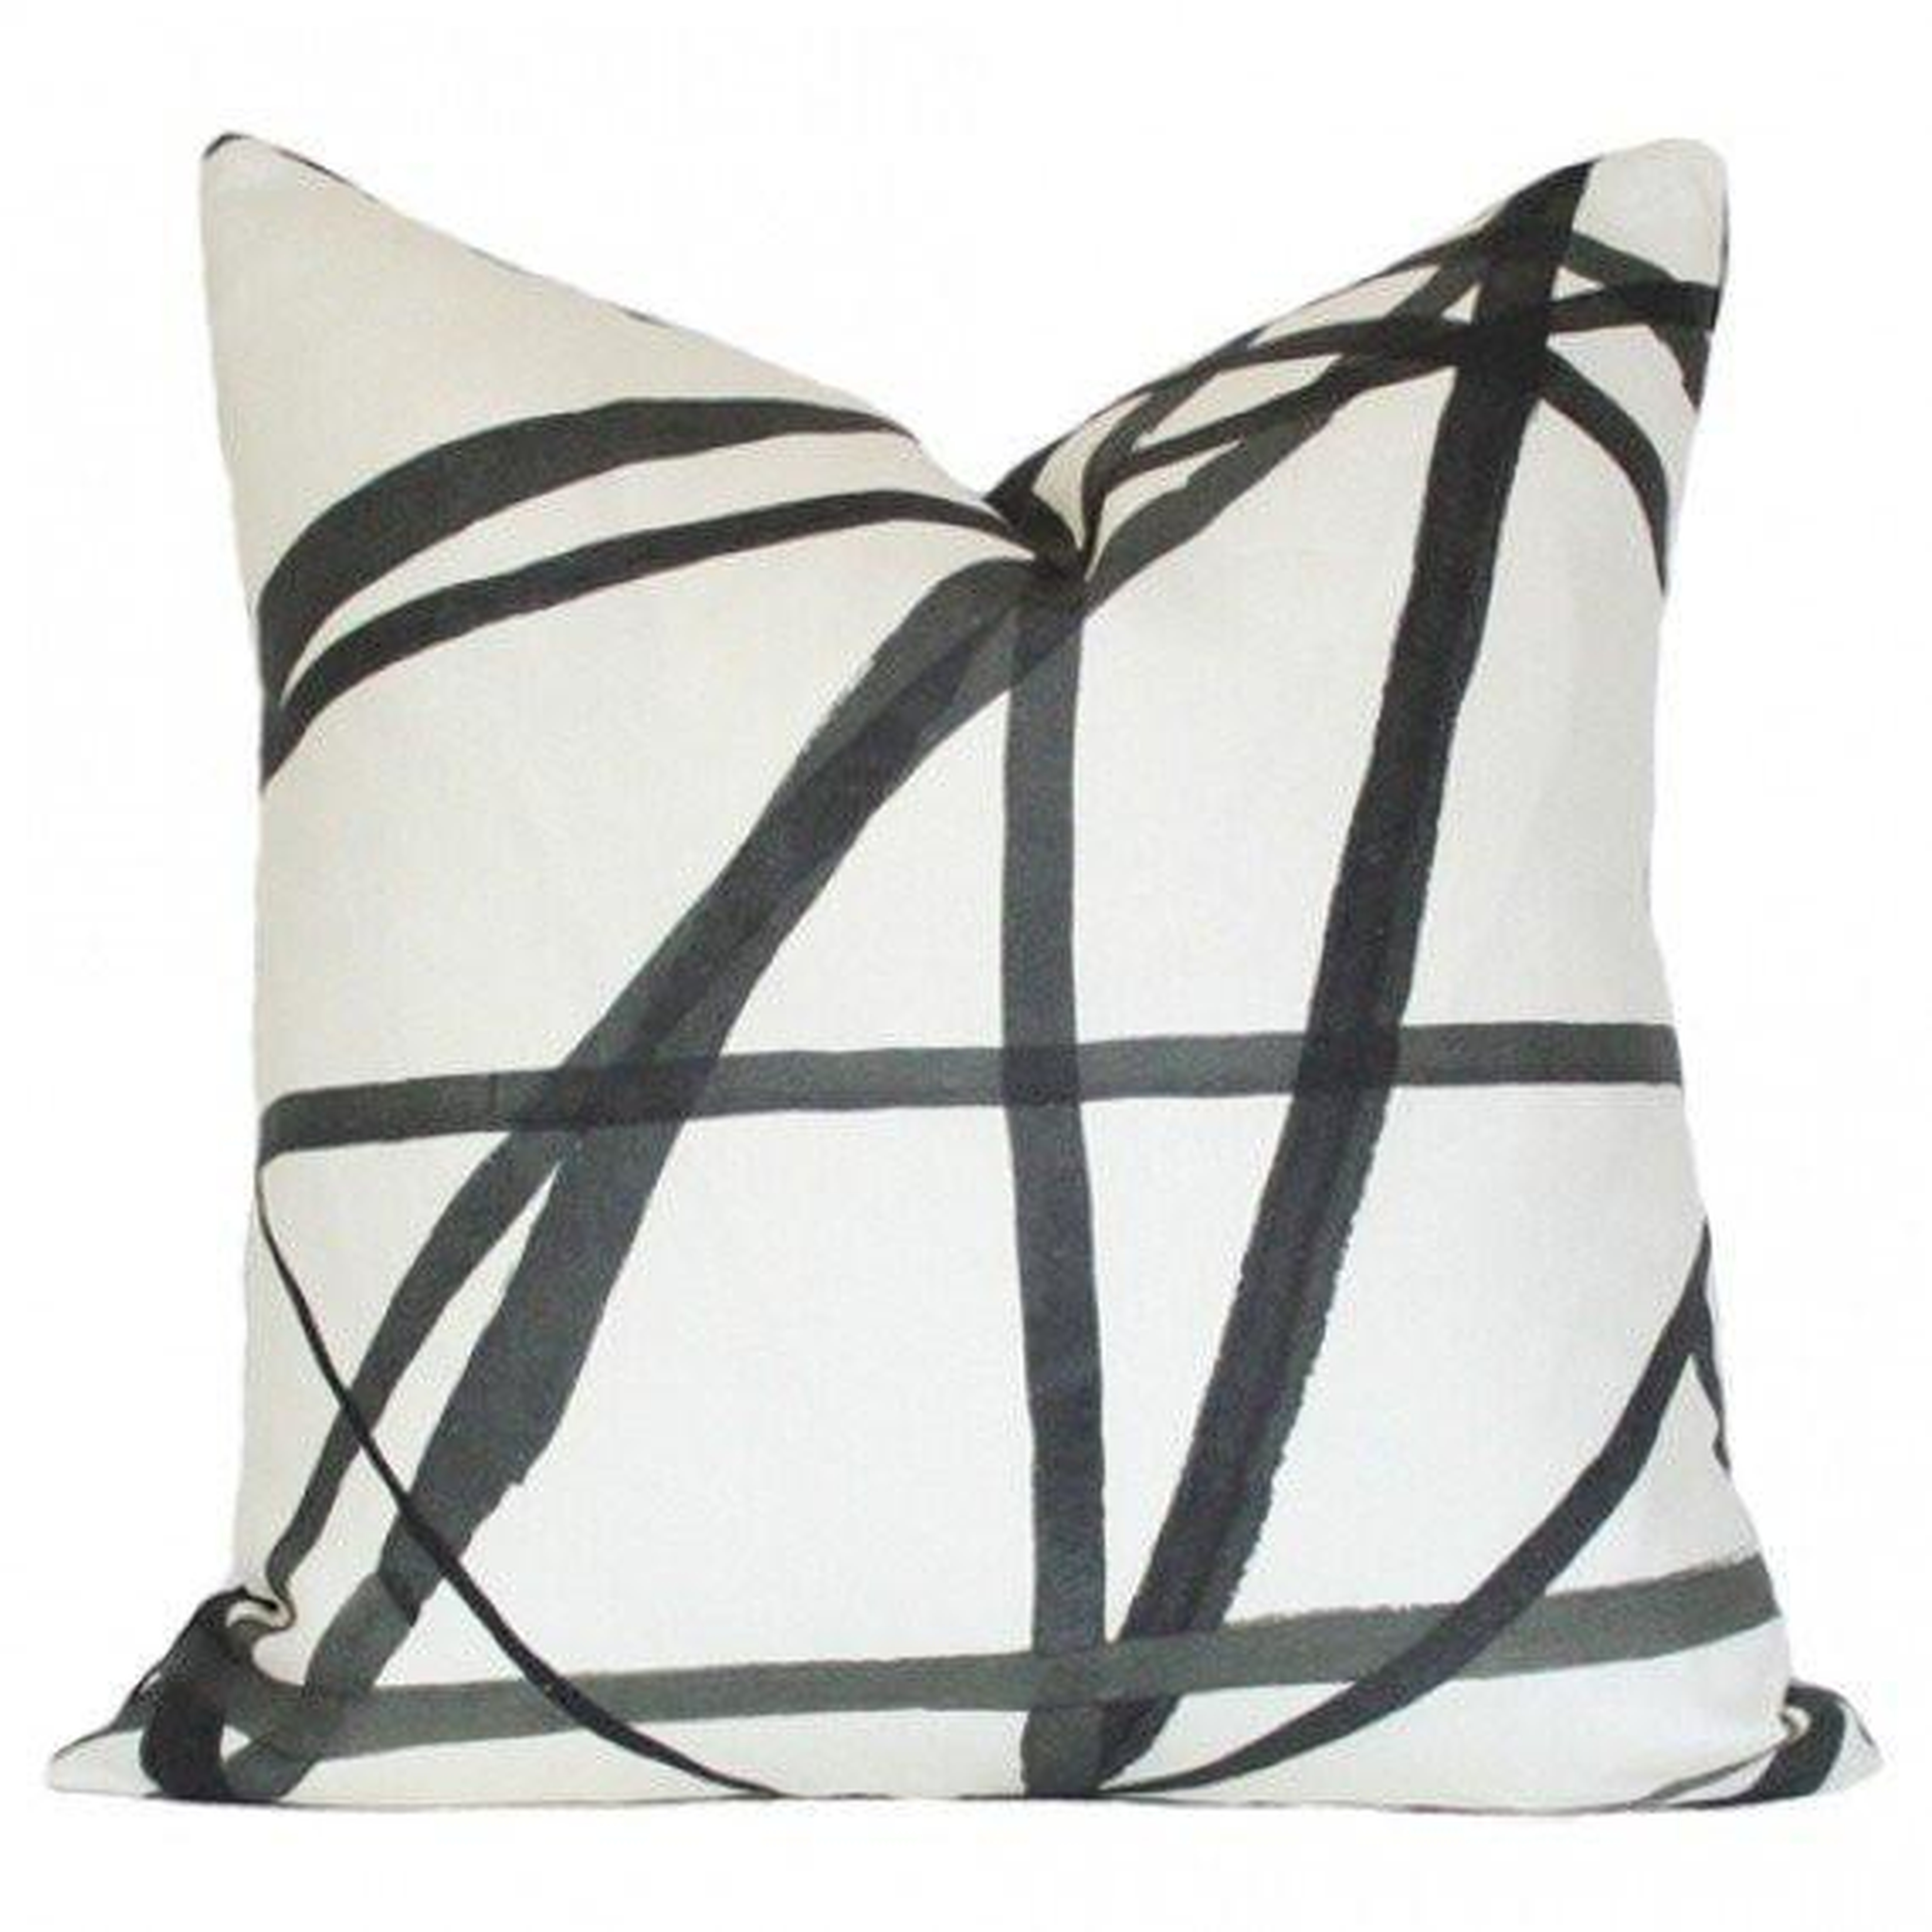 Channels Ebony & Ivory - Pattern on front, Solid on back - Arianna Belle